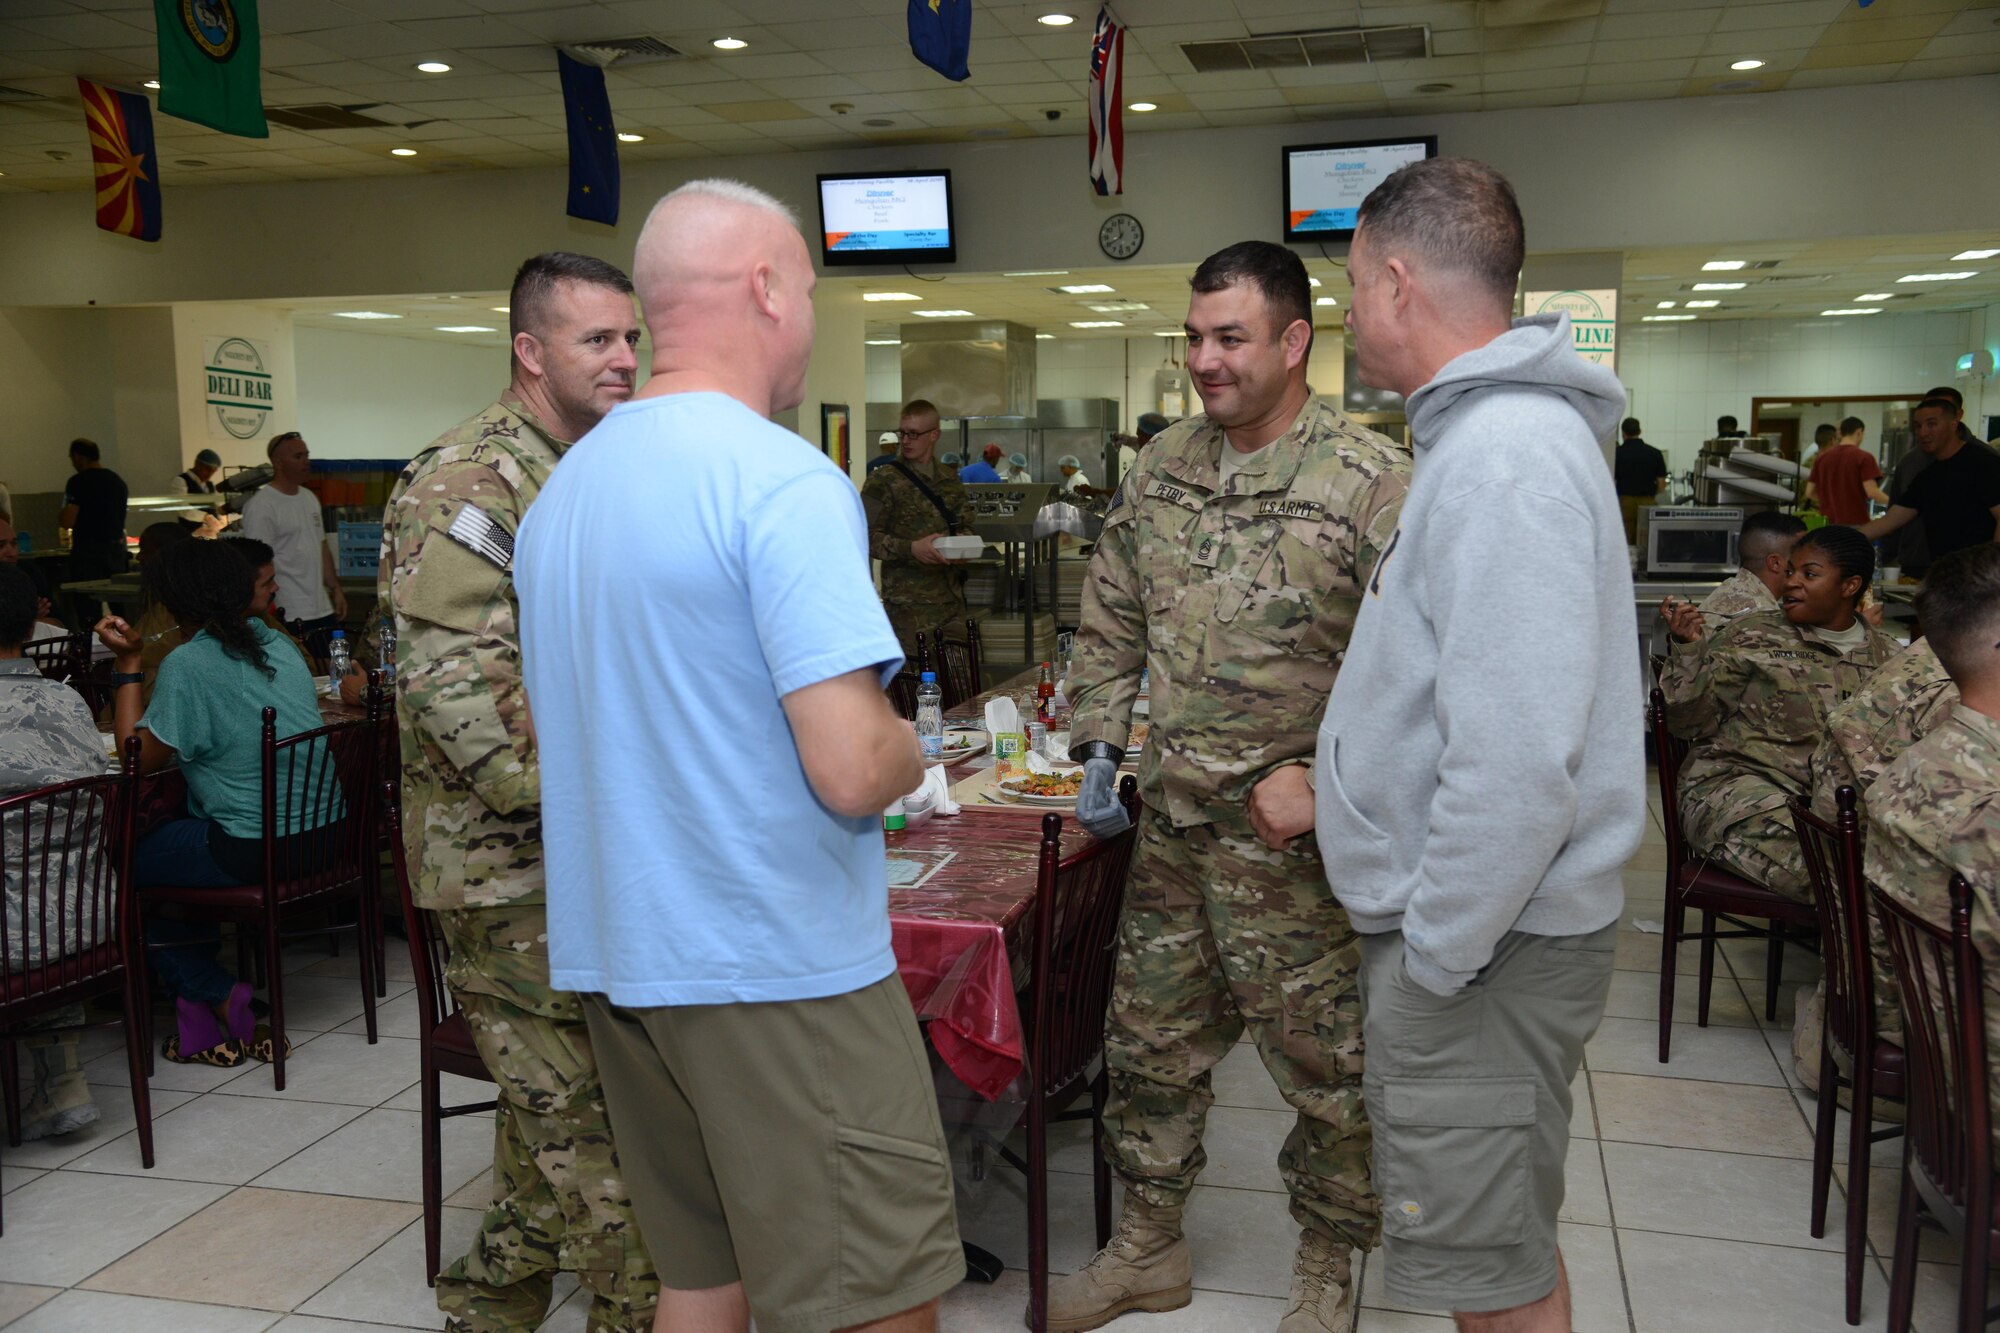 Medal of Honor recipient, retired Army Master Sgt. Leroy Petry visits with service members at The Rock dining facility April 18, 2015. Petry was transitioning through the base after a five-day visit to Afghanistan as part of Operation Proper Exit. Operation Proper Exit, part of the Troops First Foundation, provides the opportunity for wounded warriors to return to the battle space, share their experiences. (U.S. Air Force photo by Tech. Sgt. Jared Marquis/released)